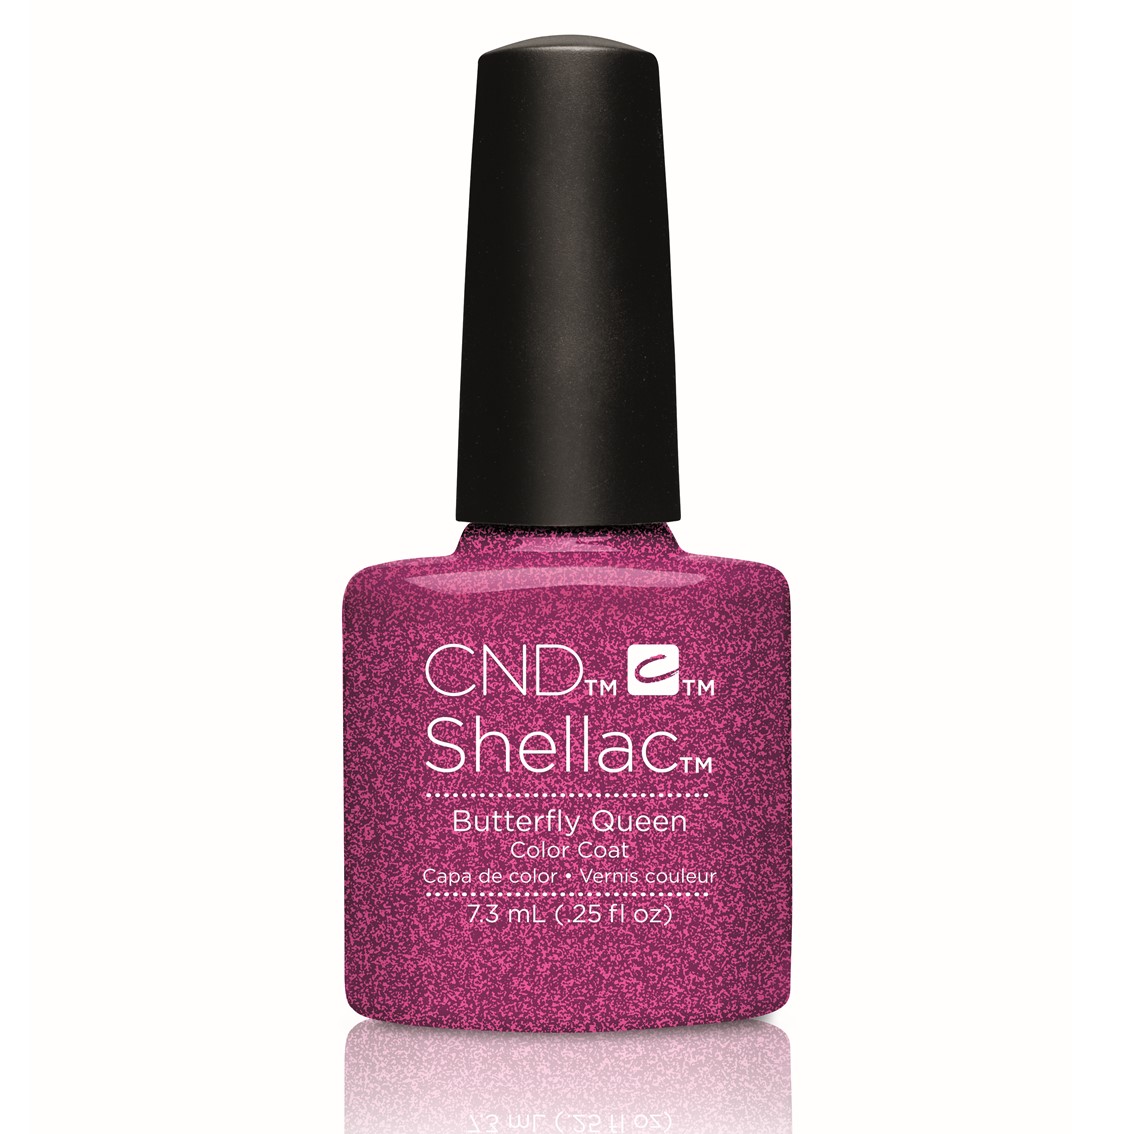 CND™ SHELLAC™ Butterfly Queen